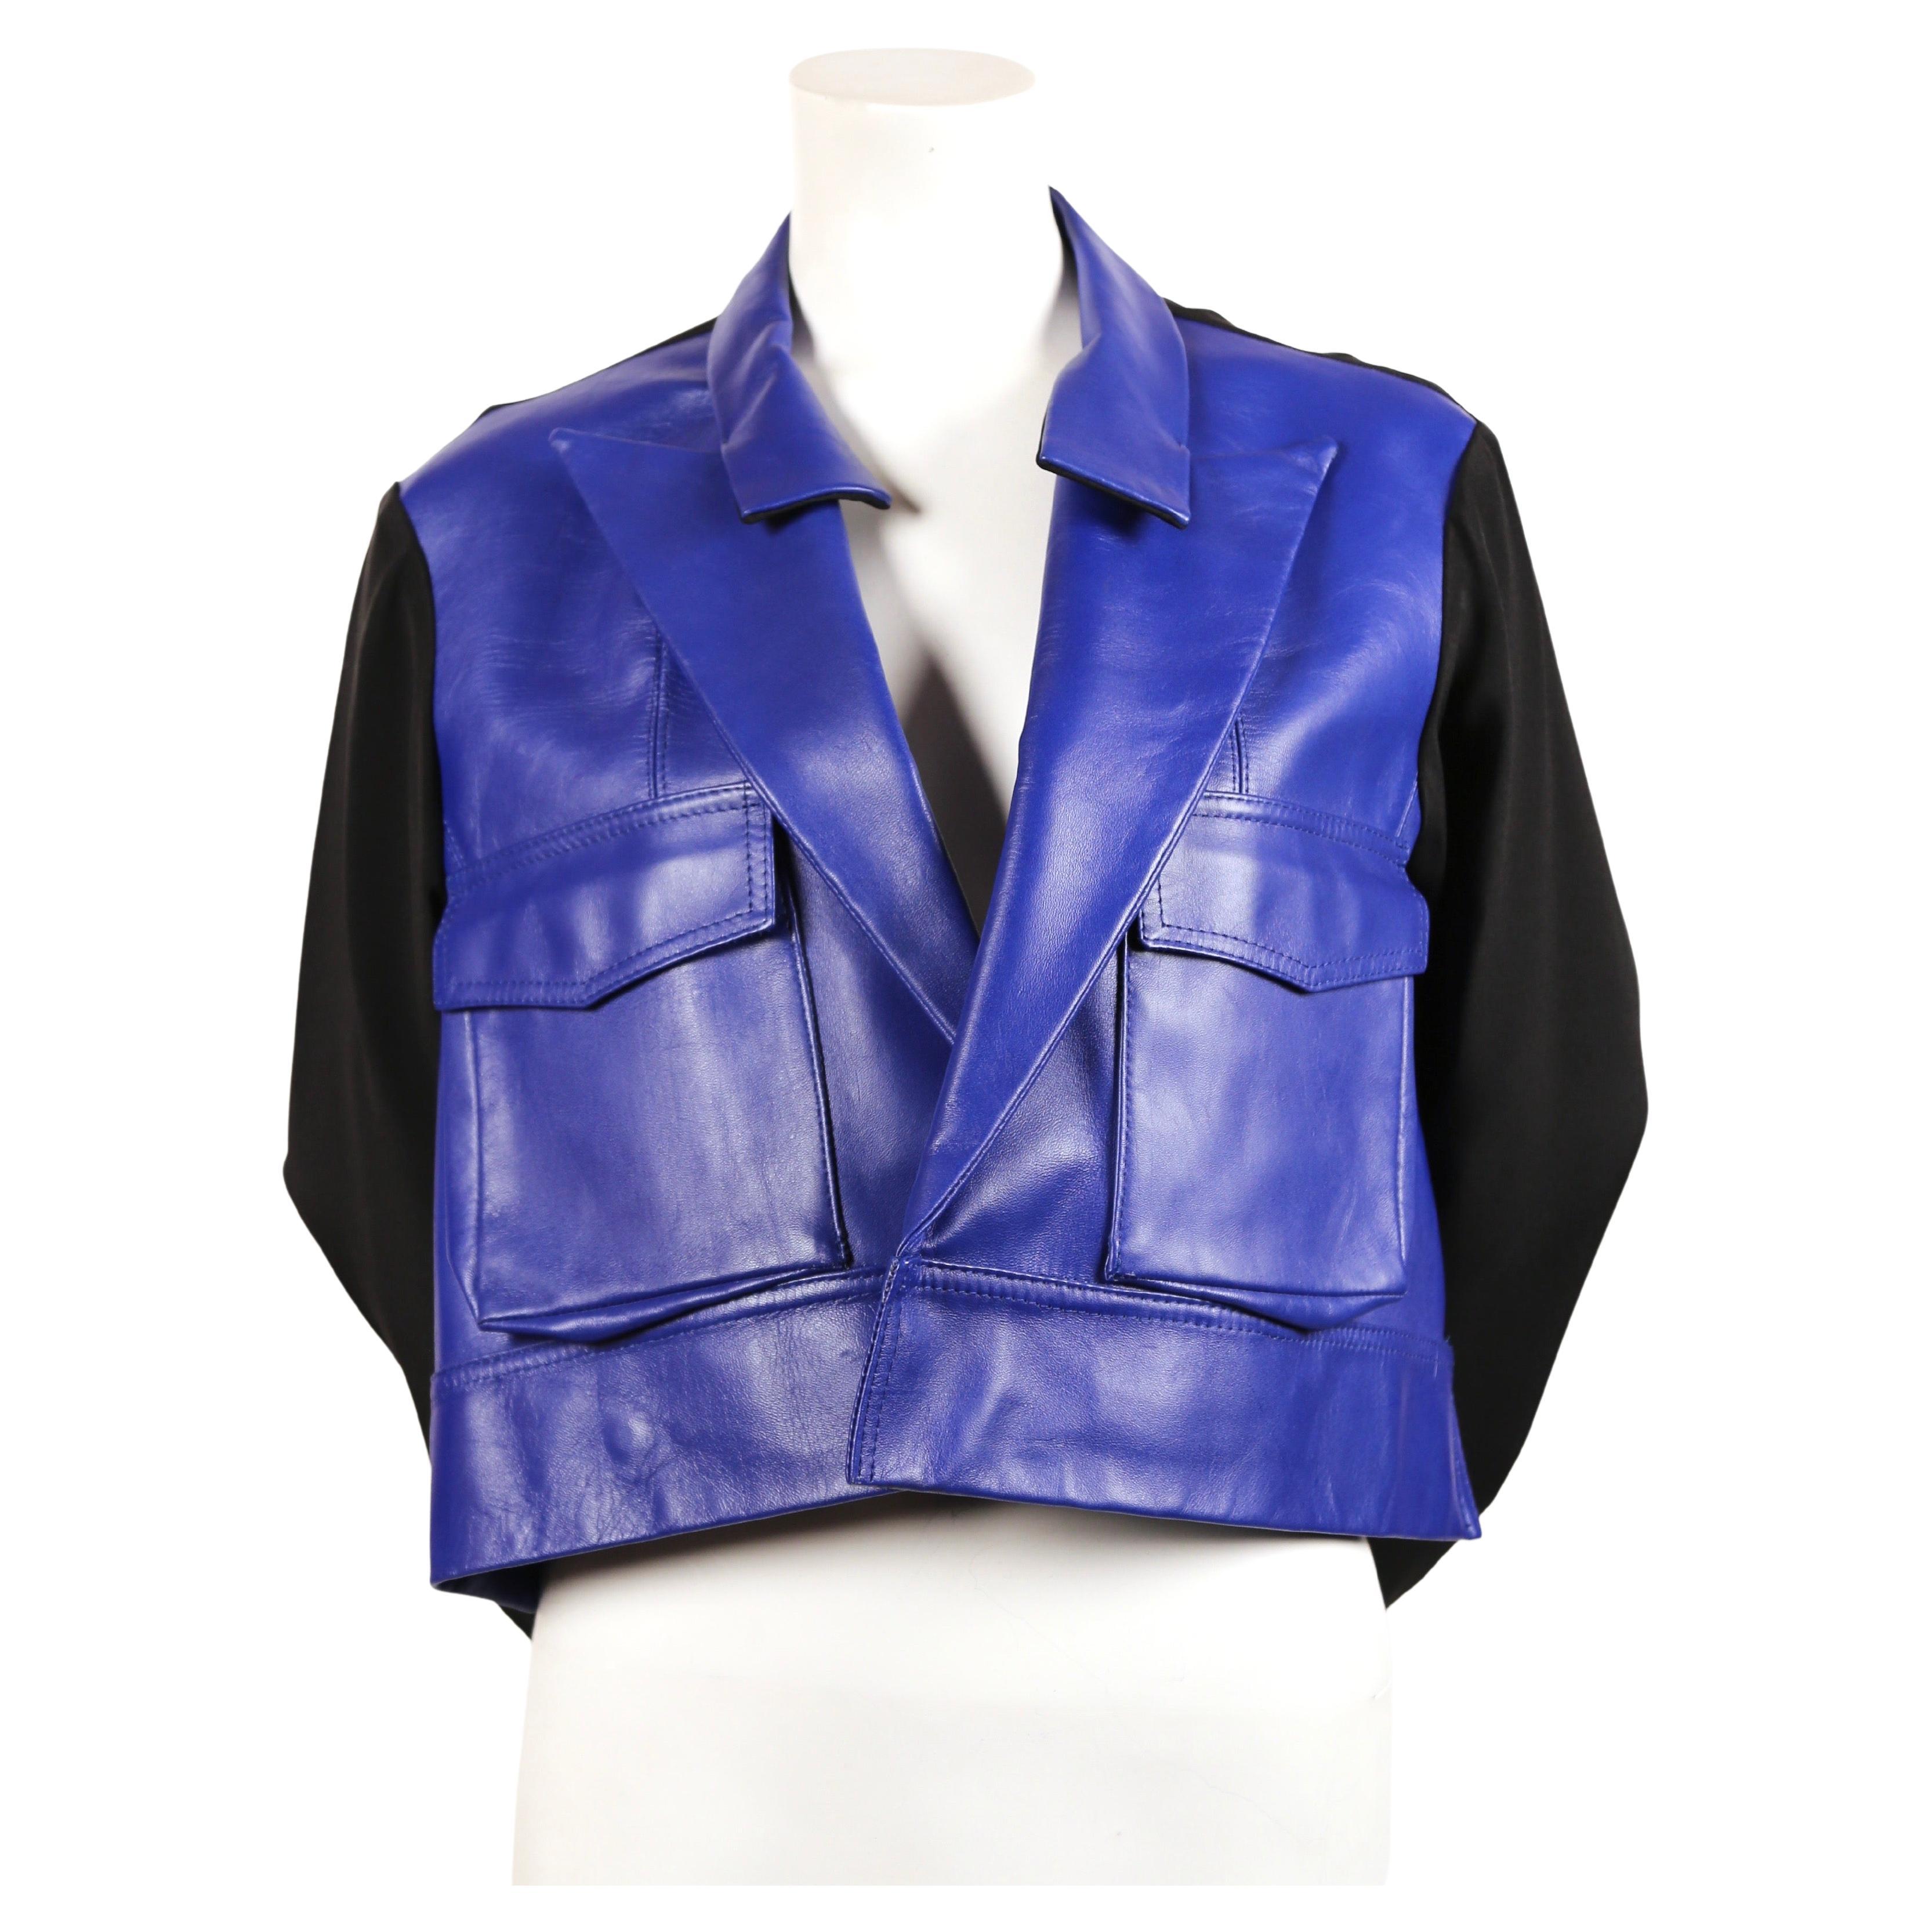 Vivid-blue, leather jacket with black silk sleeves and forced forward closure from Yohji Yamamoto exactly as seen on the runway fall of 2007. Looks great worn open as well. Labeled a Japanese size 2. Approximate measurements: shoulders 16